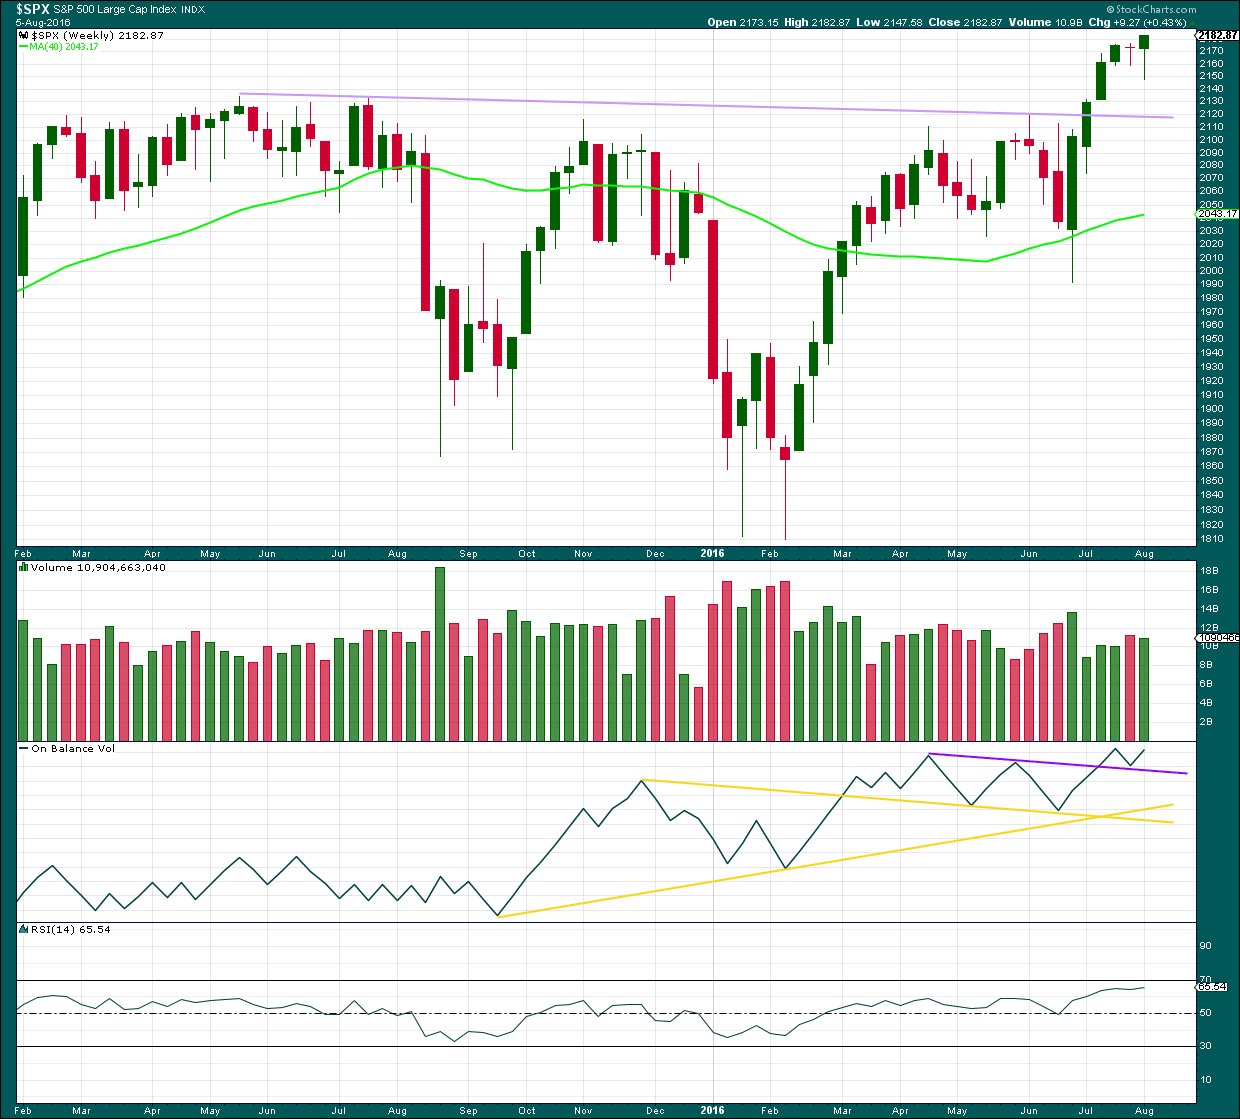 S&P 500 weekly 2016